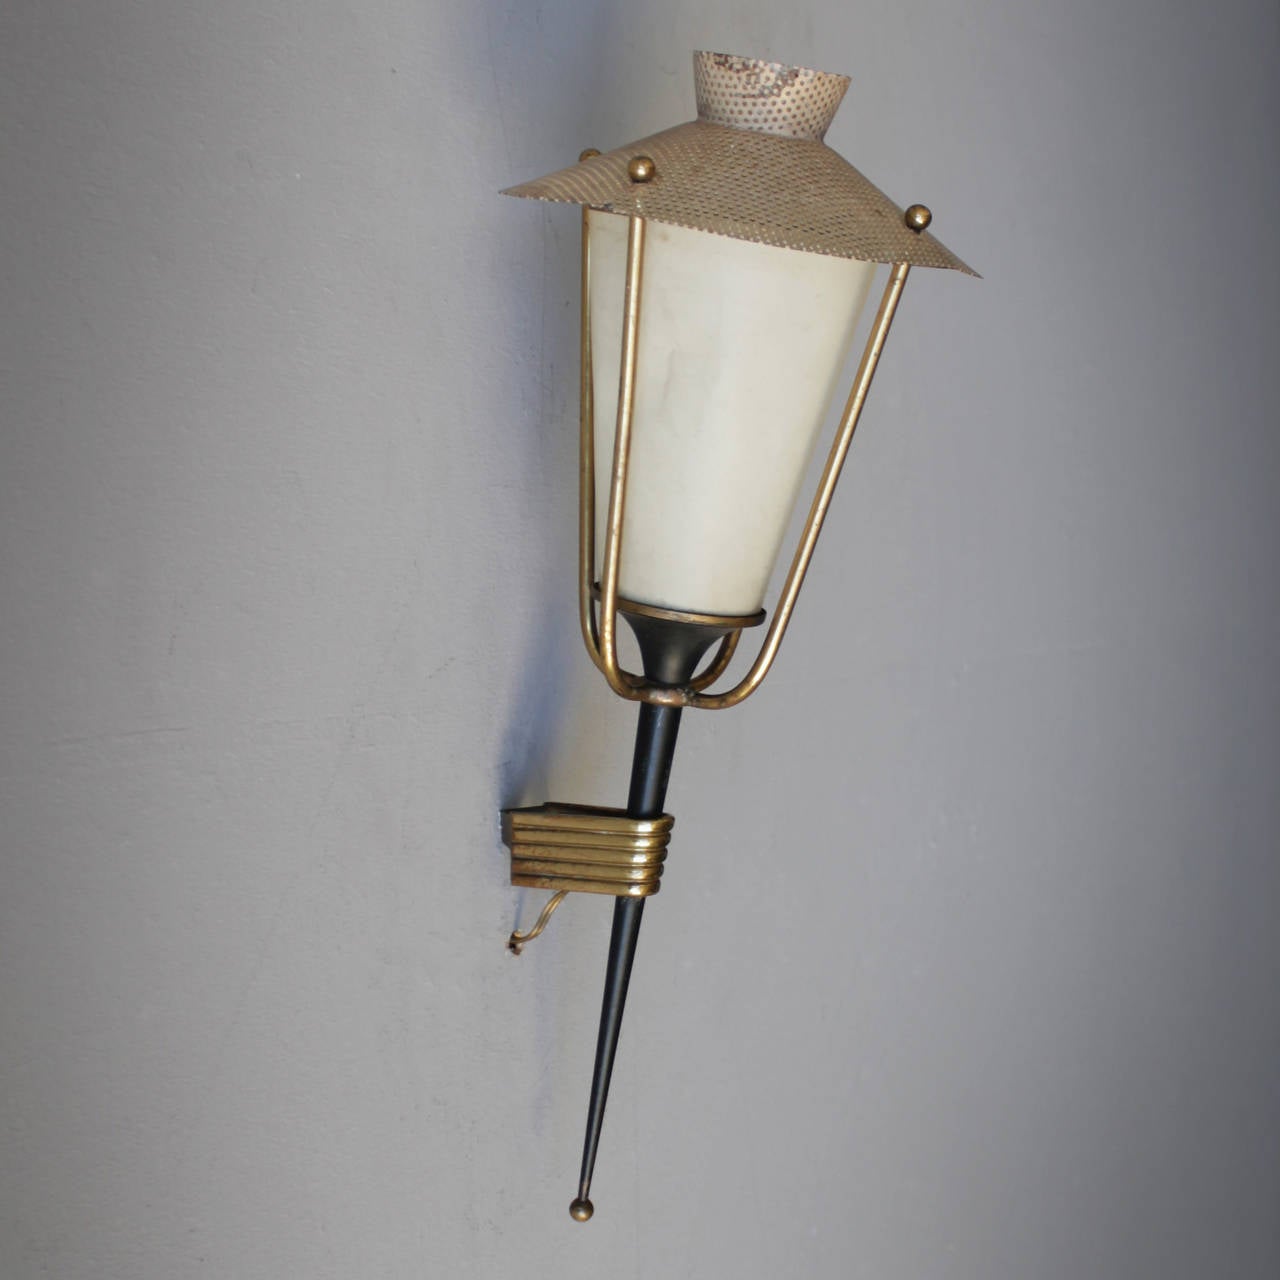 Together with companies like Disderot, Lunel and Rispal, the Paris based firm Maison Arlus had a strong influence on the modernization of French lighting design during the 1950’s. The Arlus models were obviously rooted in French Art Deco on the one